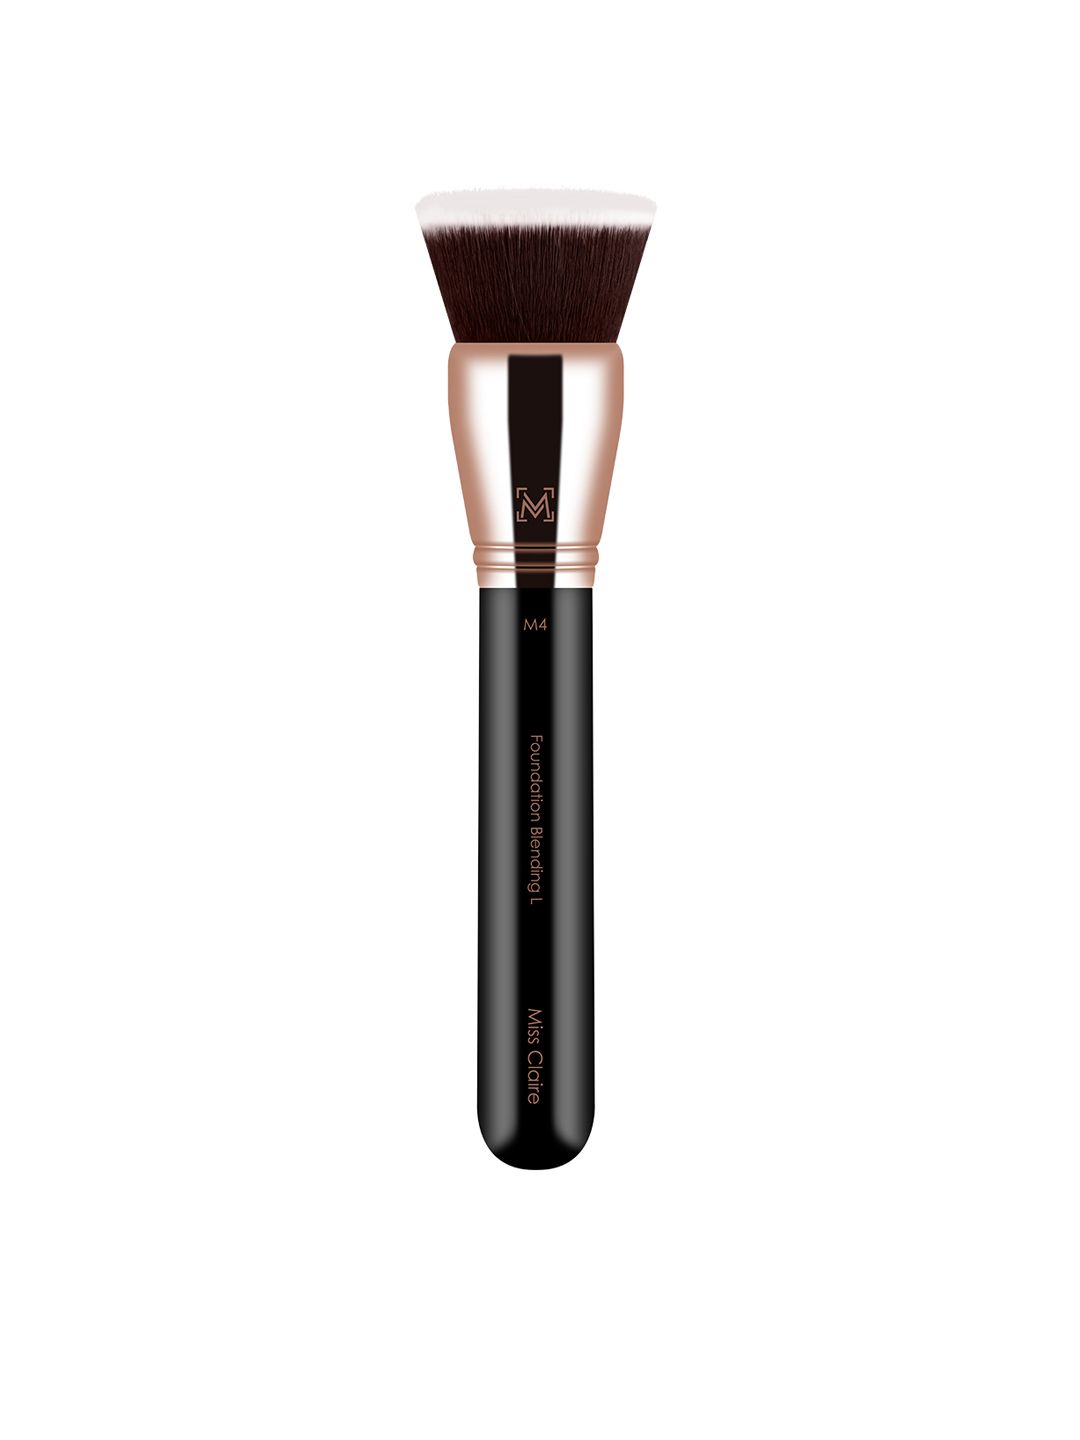 Miss Claire M4 - Foundation Blending Brush (L) - Rose Gold-Toned & Black Price in India